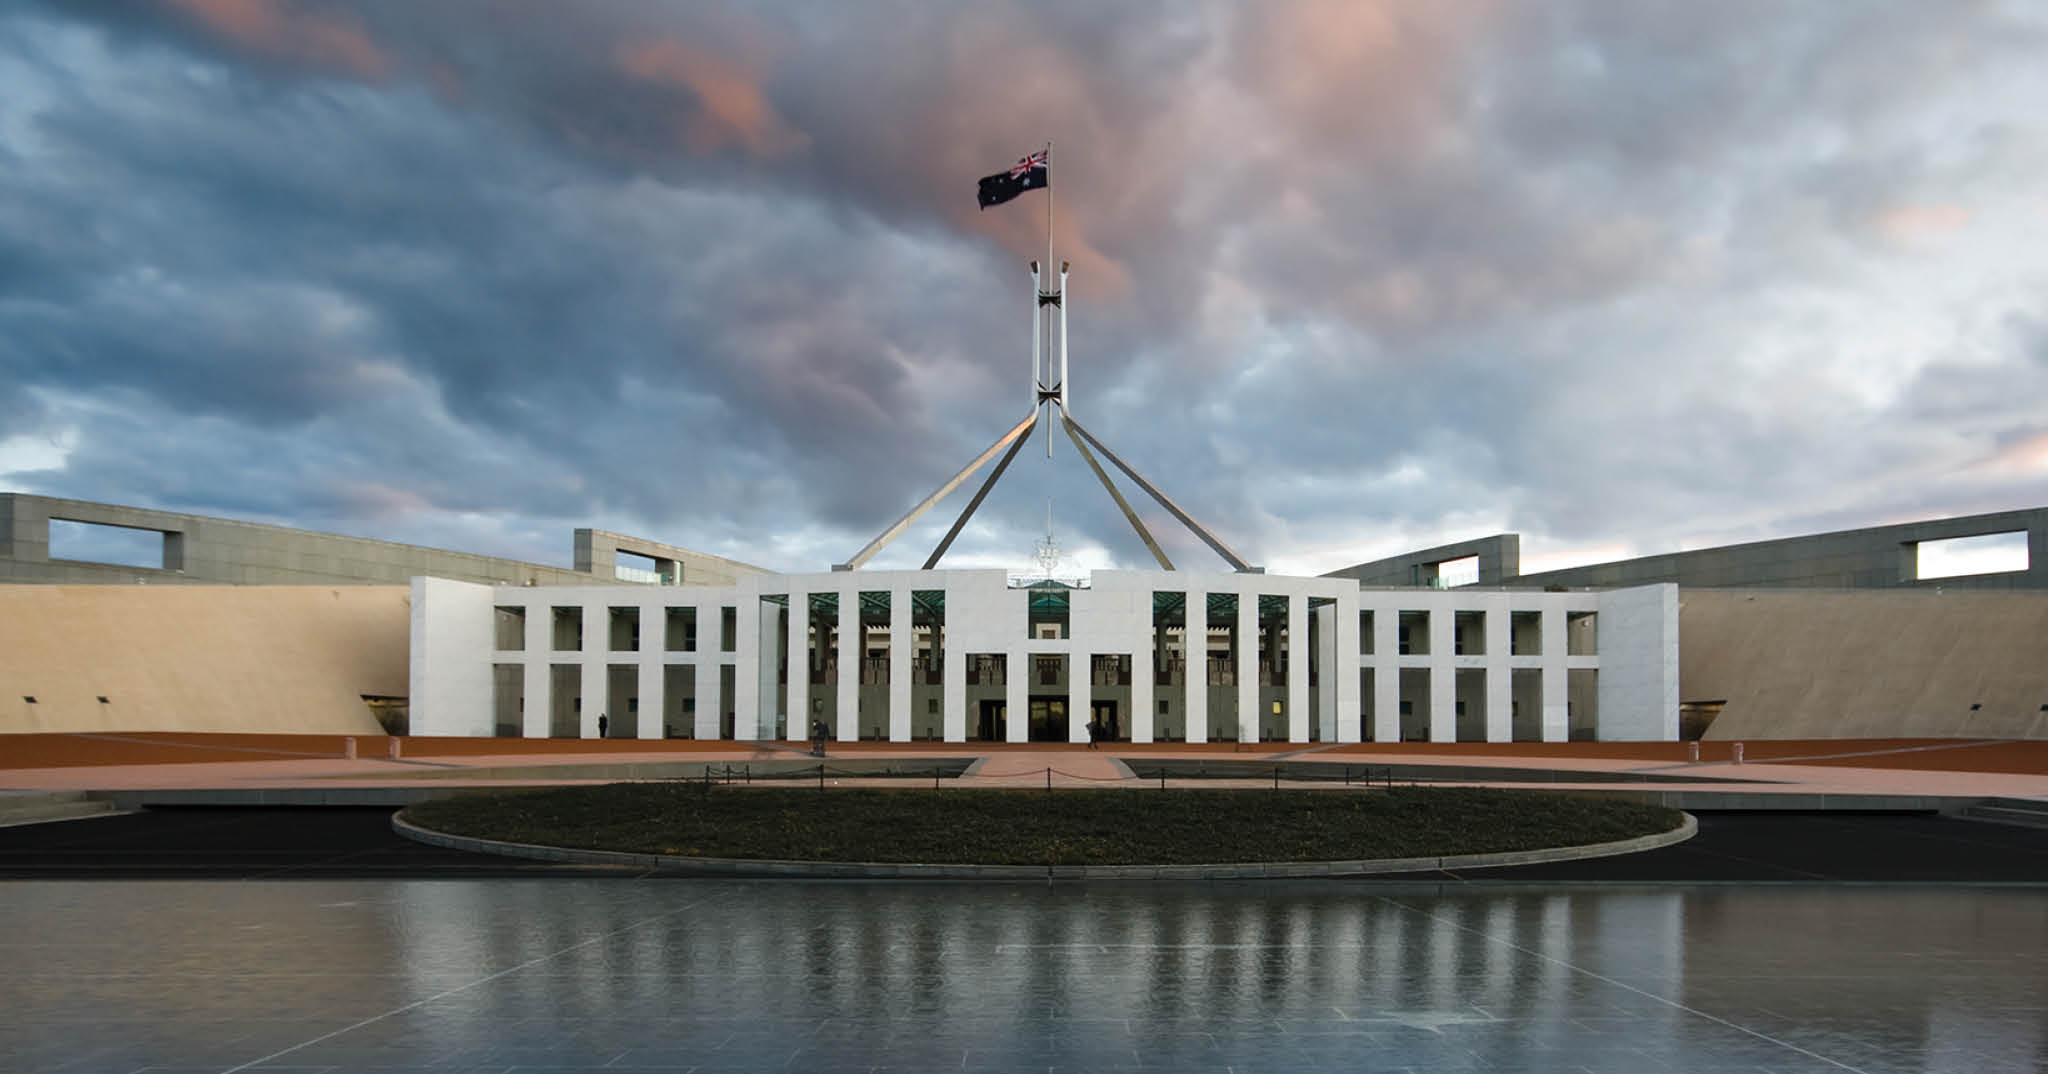 Parliament House Canberra with grey-blue-pink clouds in the background.